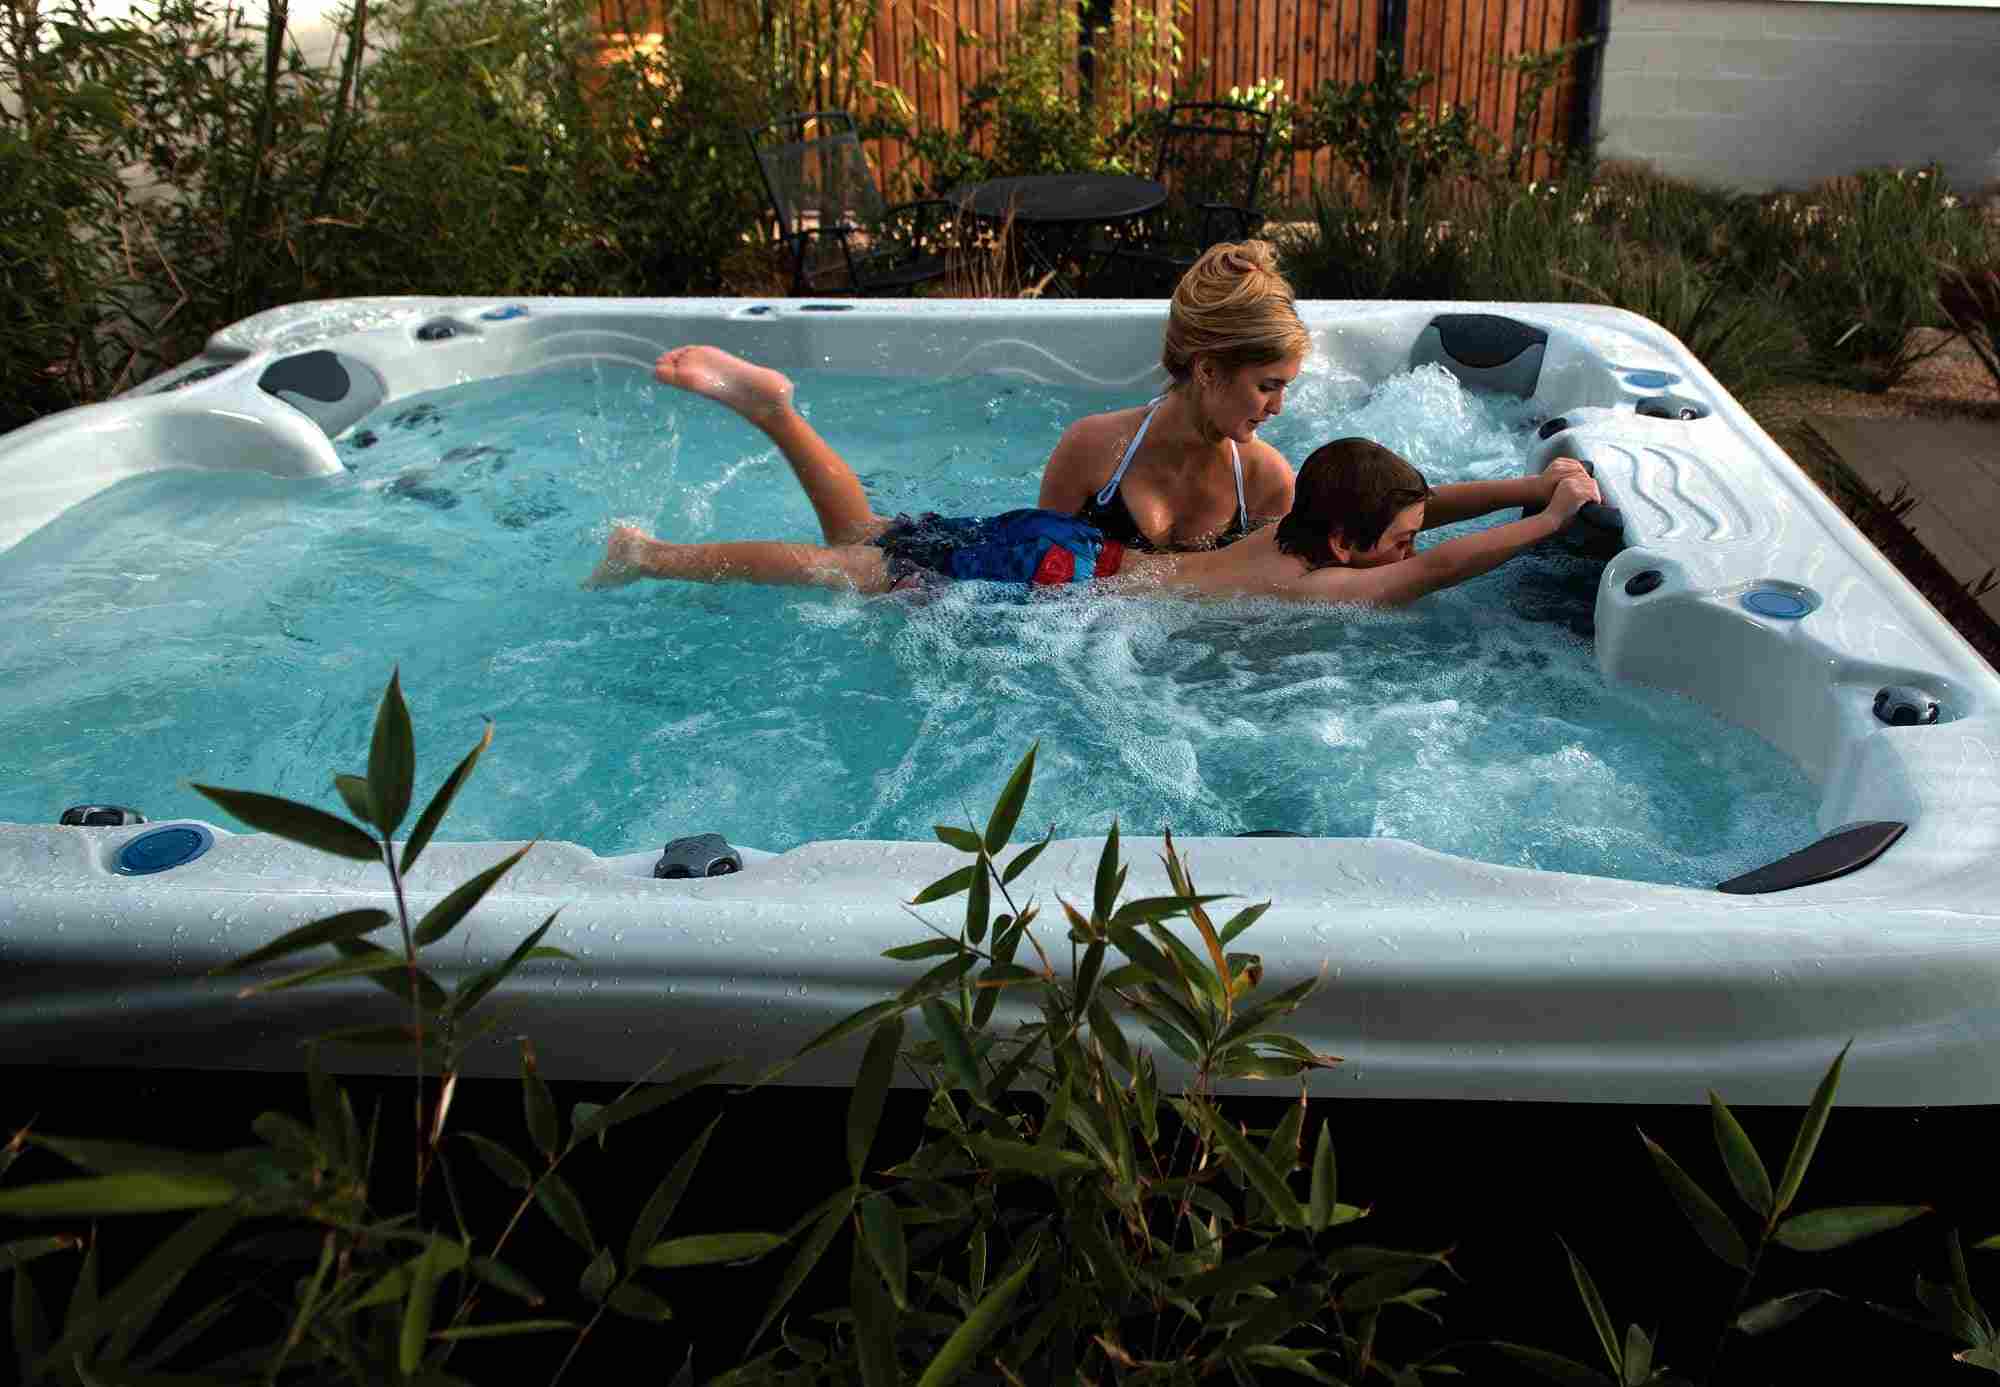 There’s Bubbles and Foam in my Hottub! - RnR Hot Tubs - Hot Tubs and Spa Calgary - Featured Image